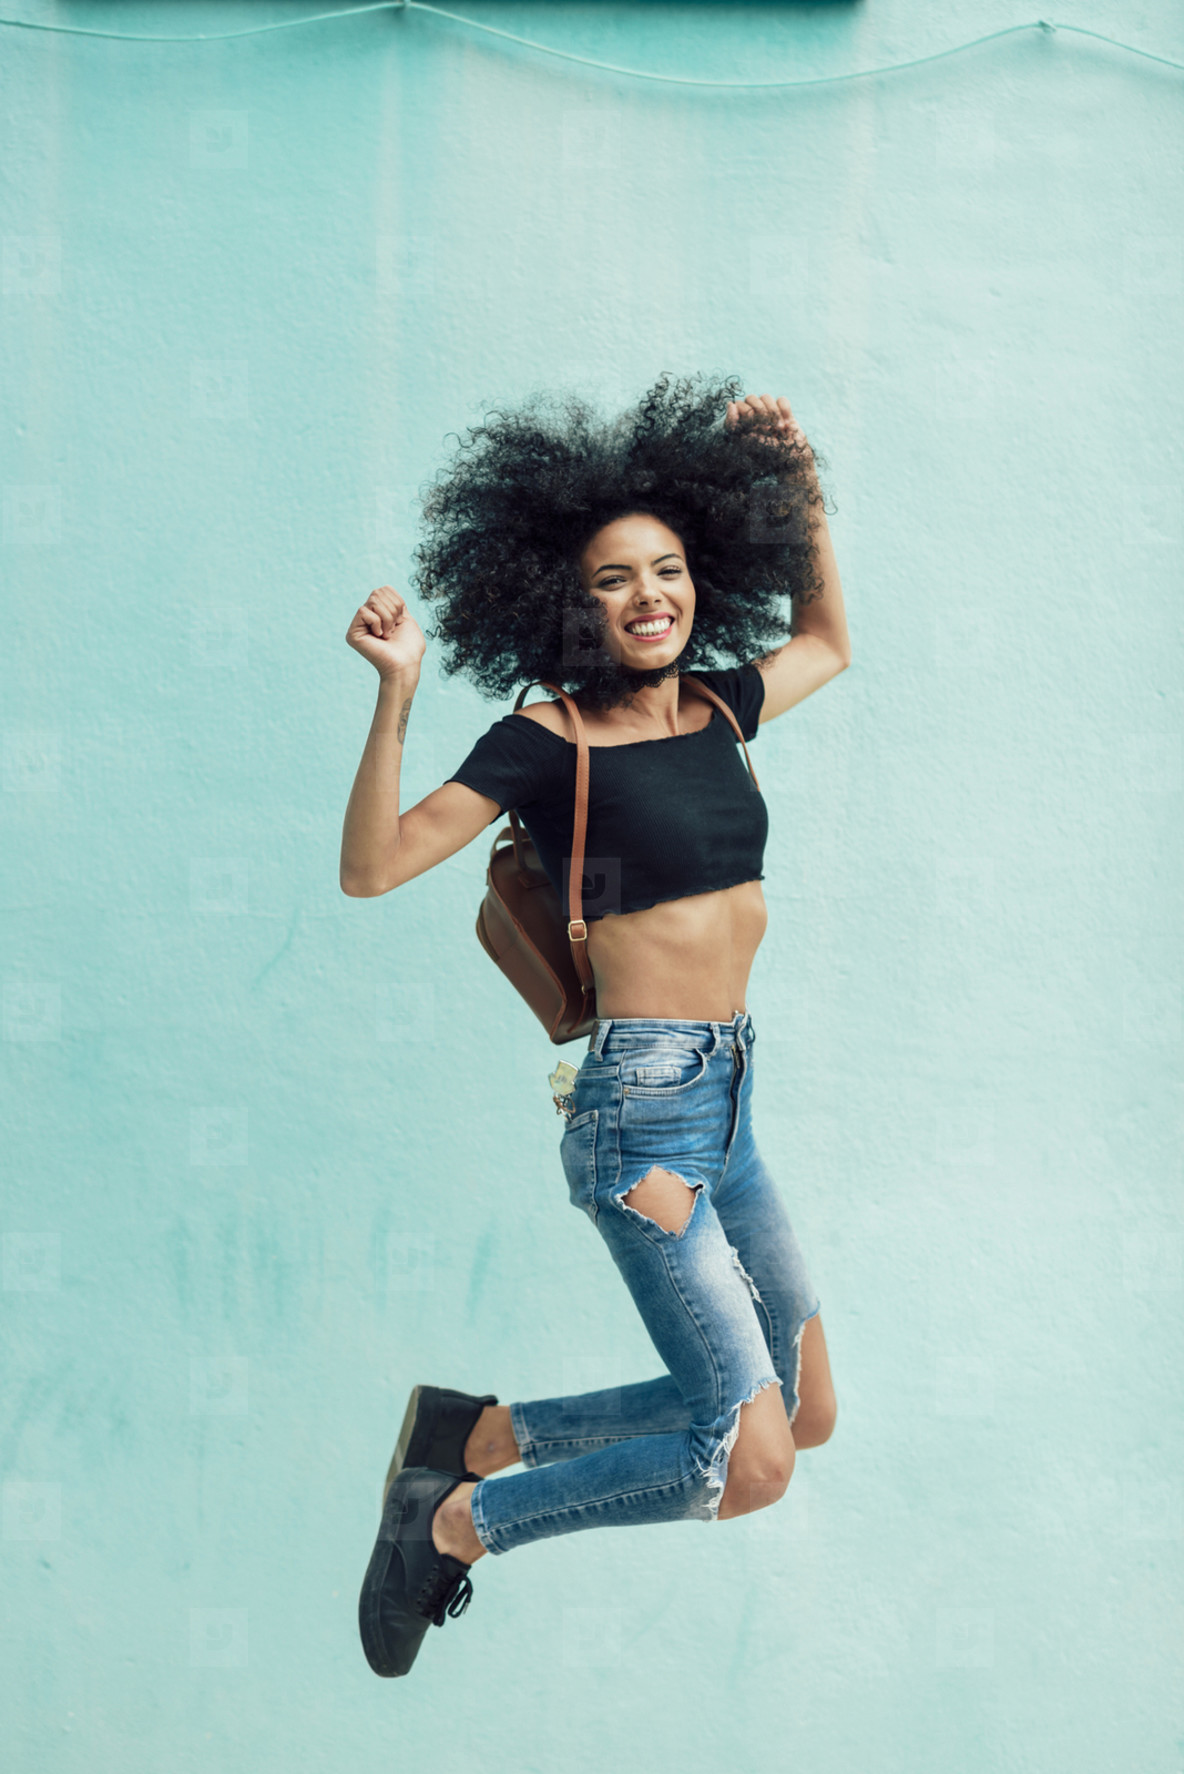 Young mixed woman with afro hair jumping outdoors